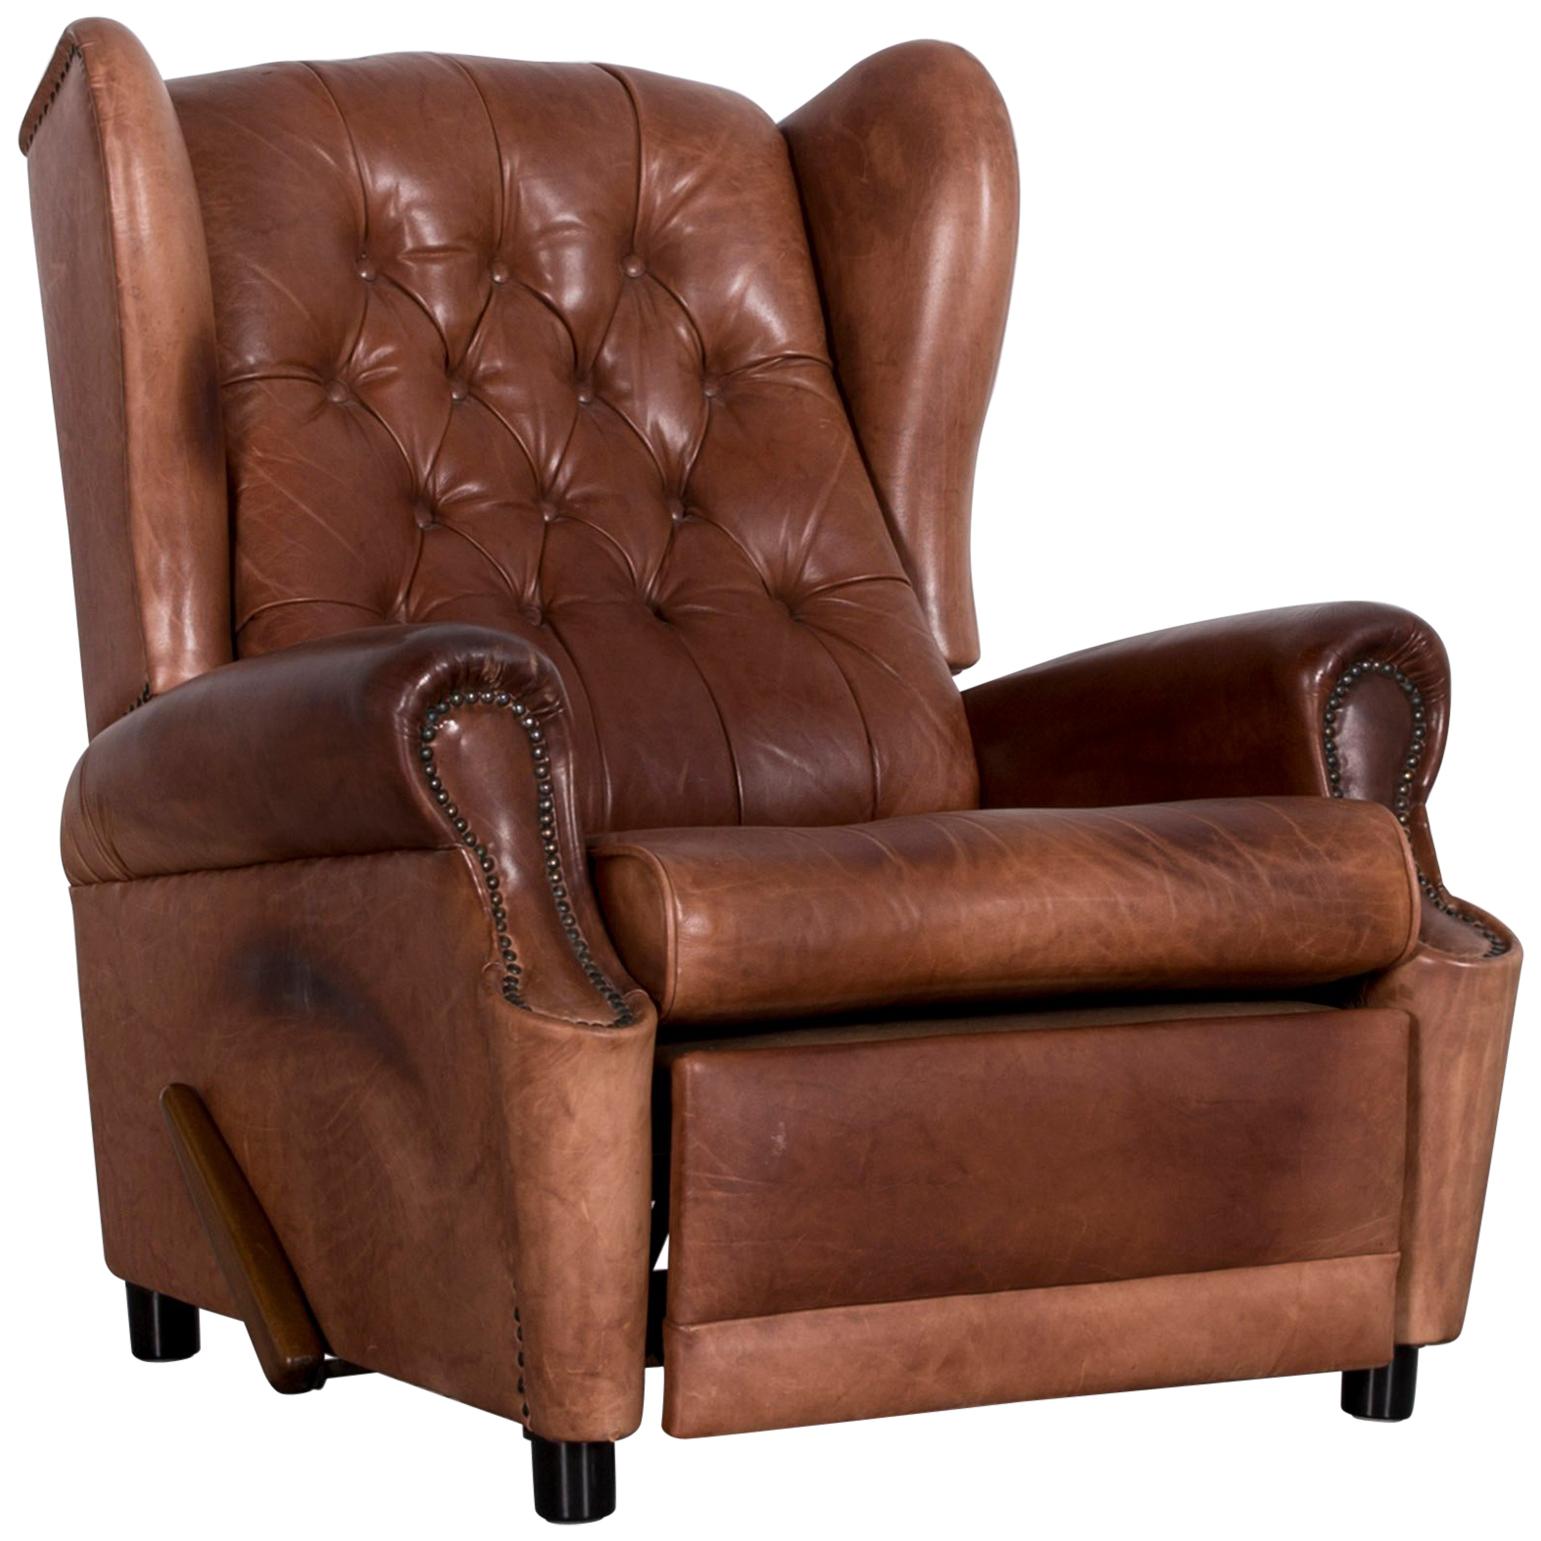 Chesterfield Leather Armchair Brown One-Seat Vintage Retro with Relax Function